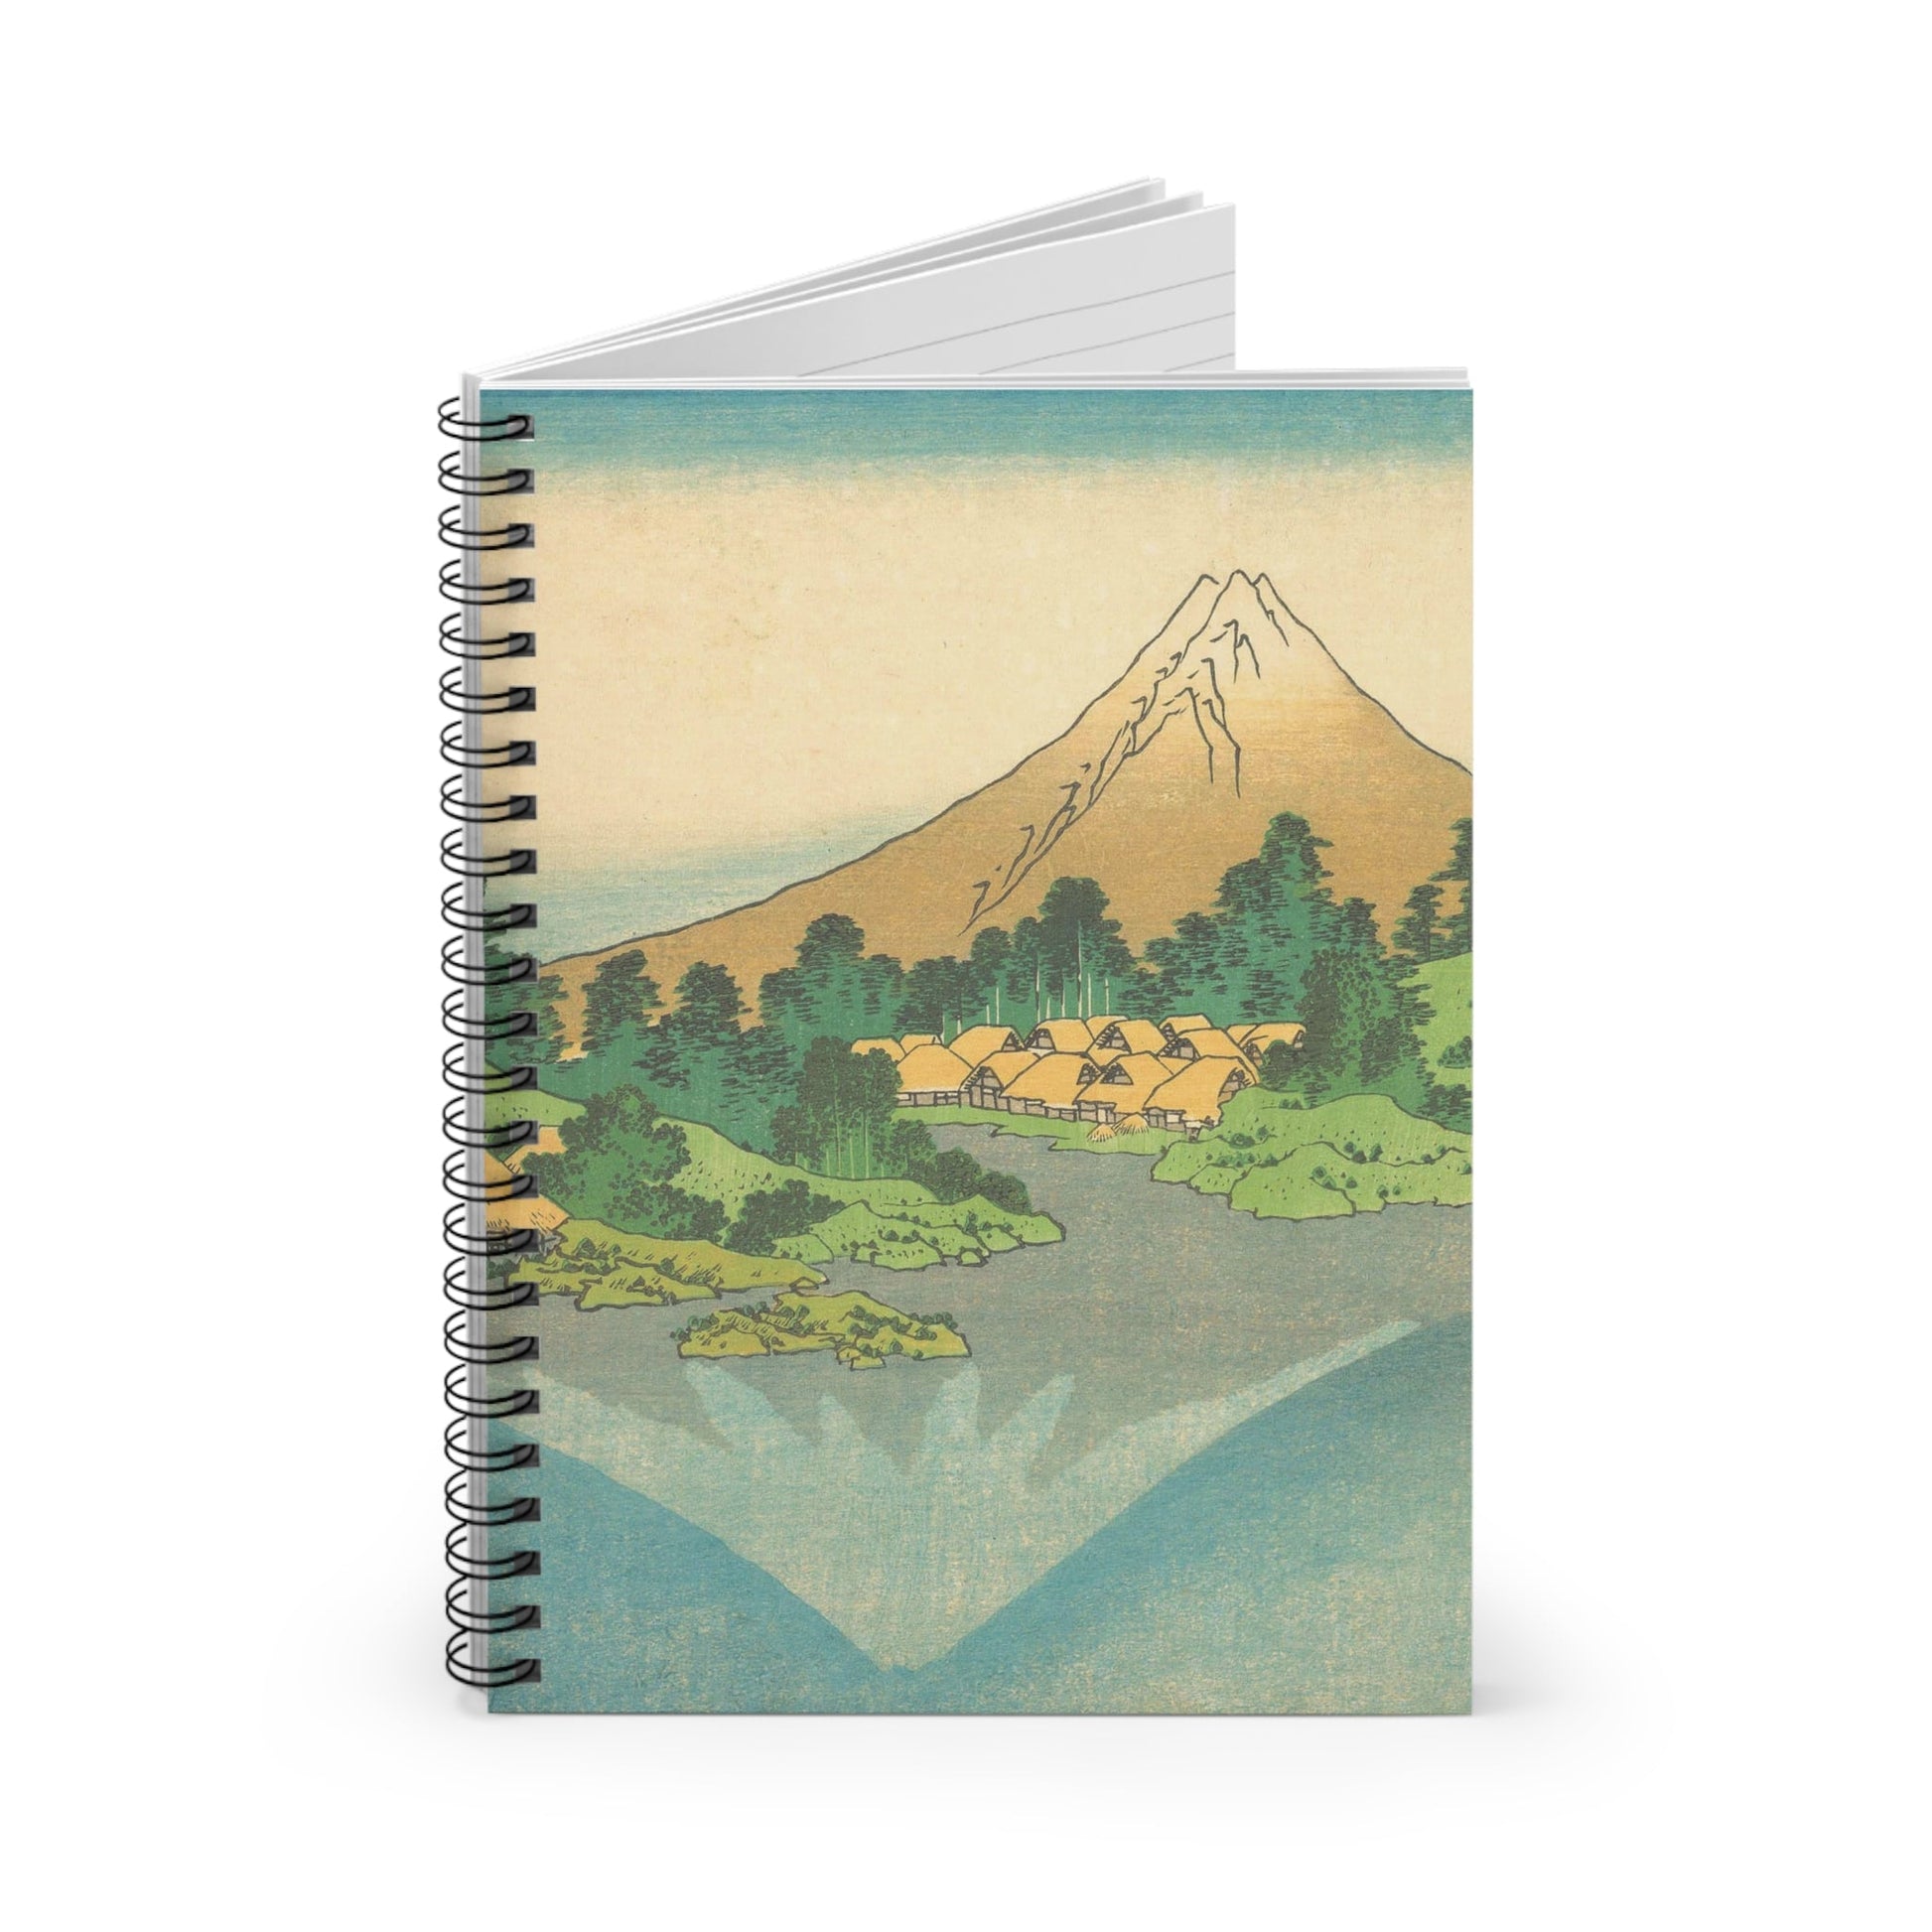 Japanese Mountain Spiral Notebook Standing up on White Desk